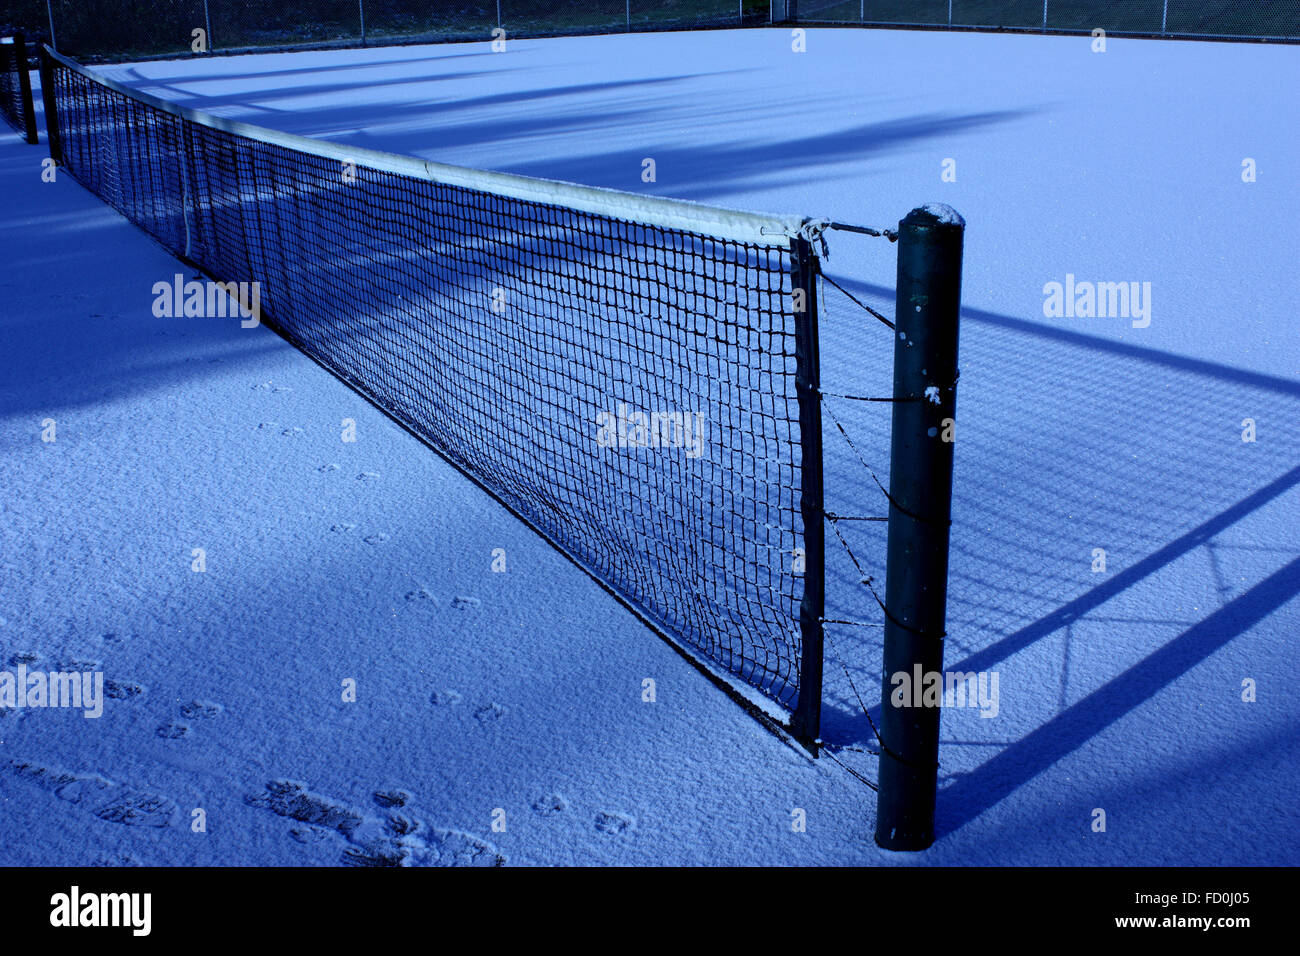 Tennis court in the snow Stock Photo - Alamy